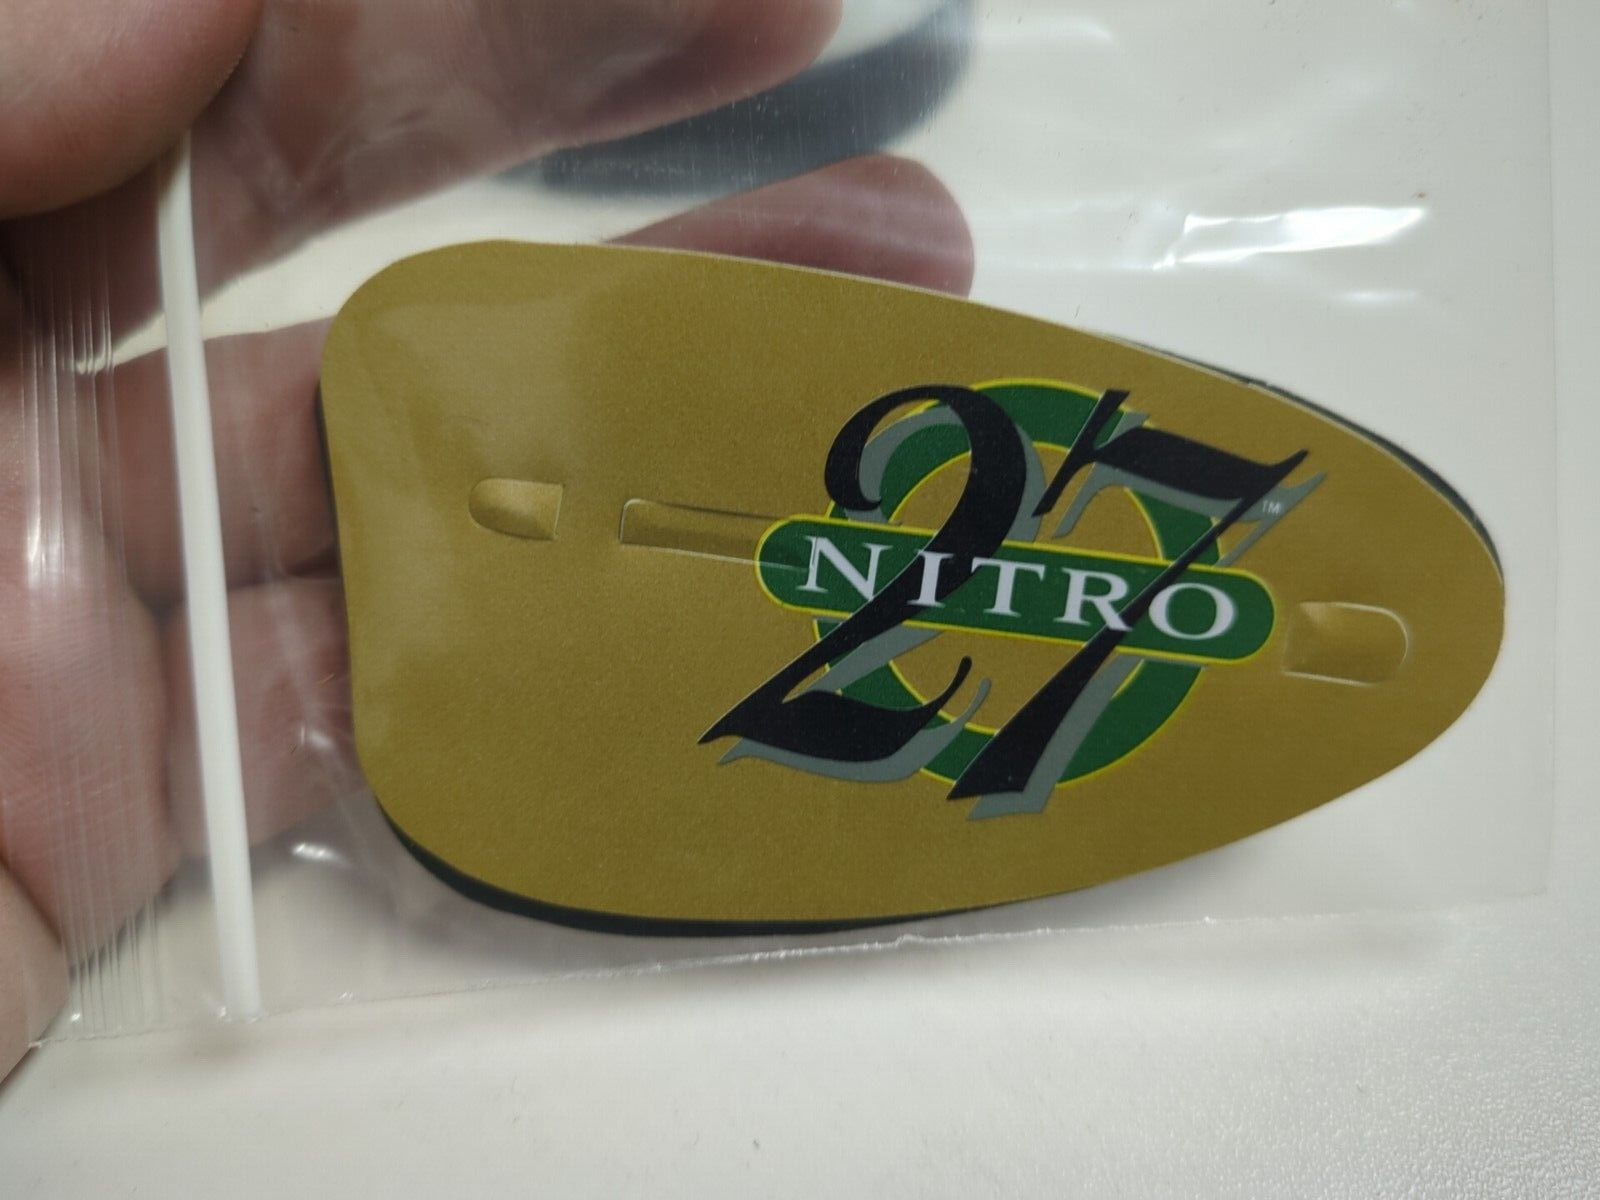 Remington Nitro 27 & STS Shooting Blinders Gold NEW Size Standard glasses trap 2